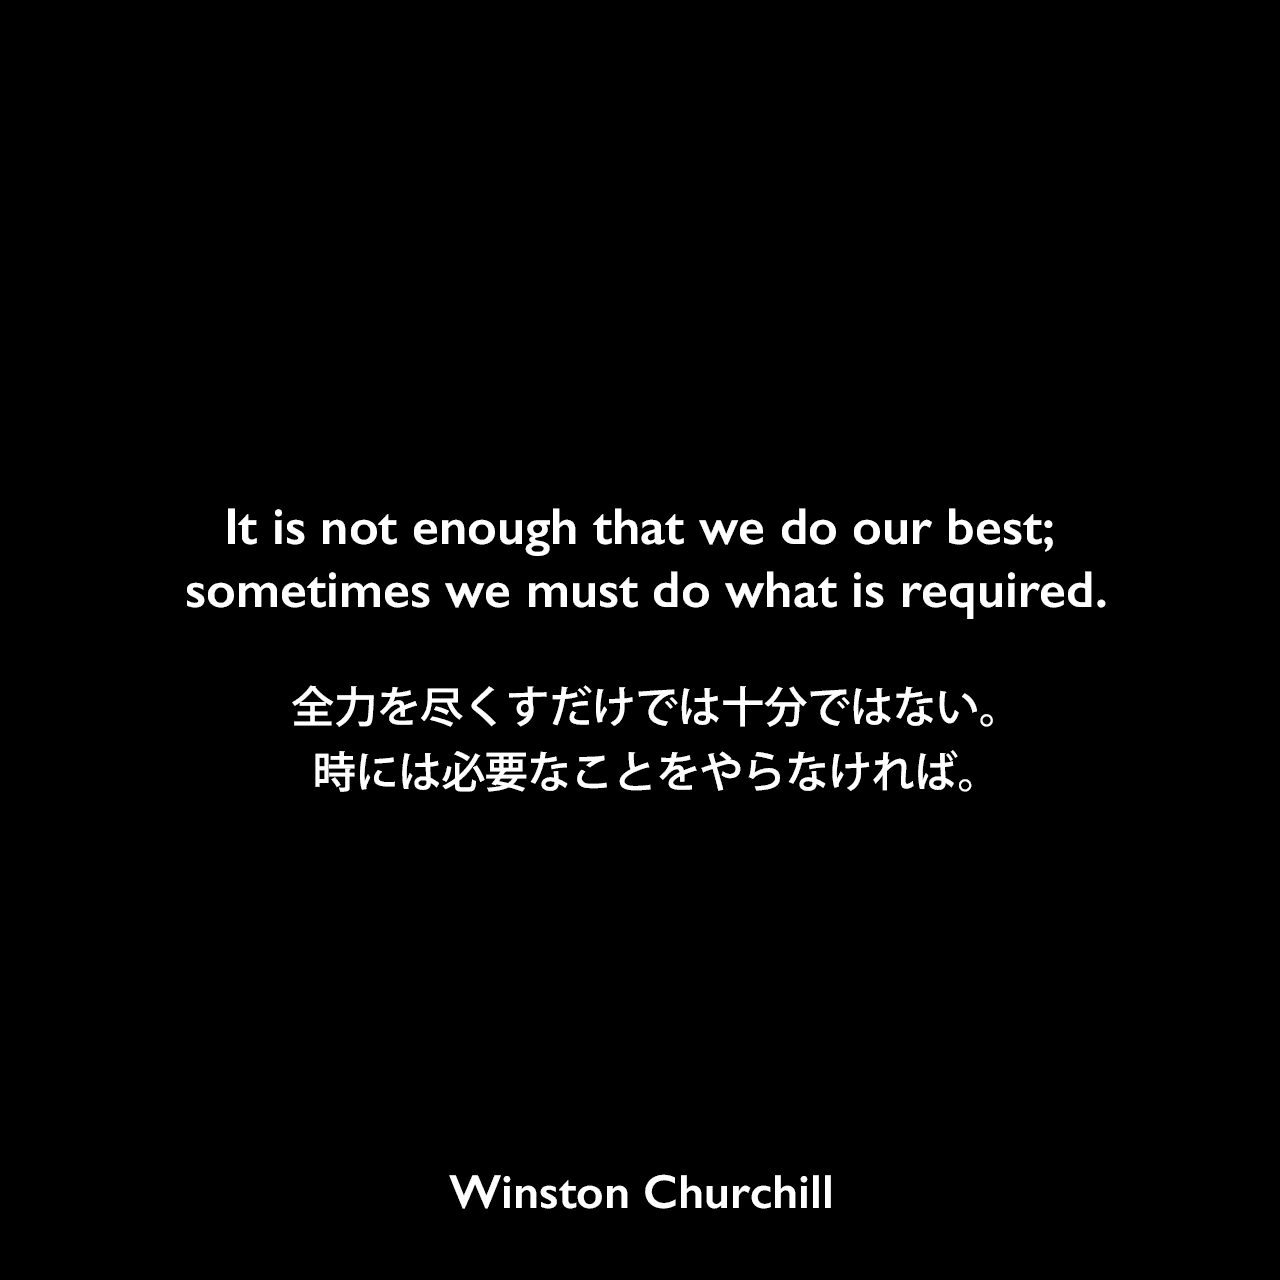 It is not enough that we do our best; sometimes we must do what is required.全力を尽くすだけでは十分ではない。時には必要なことをやらなければ。Winston Churchill